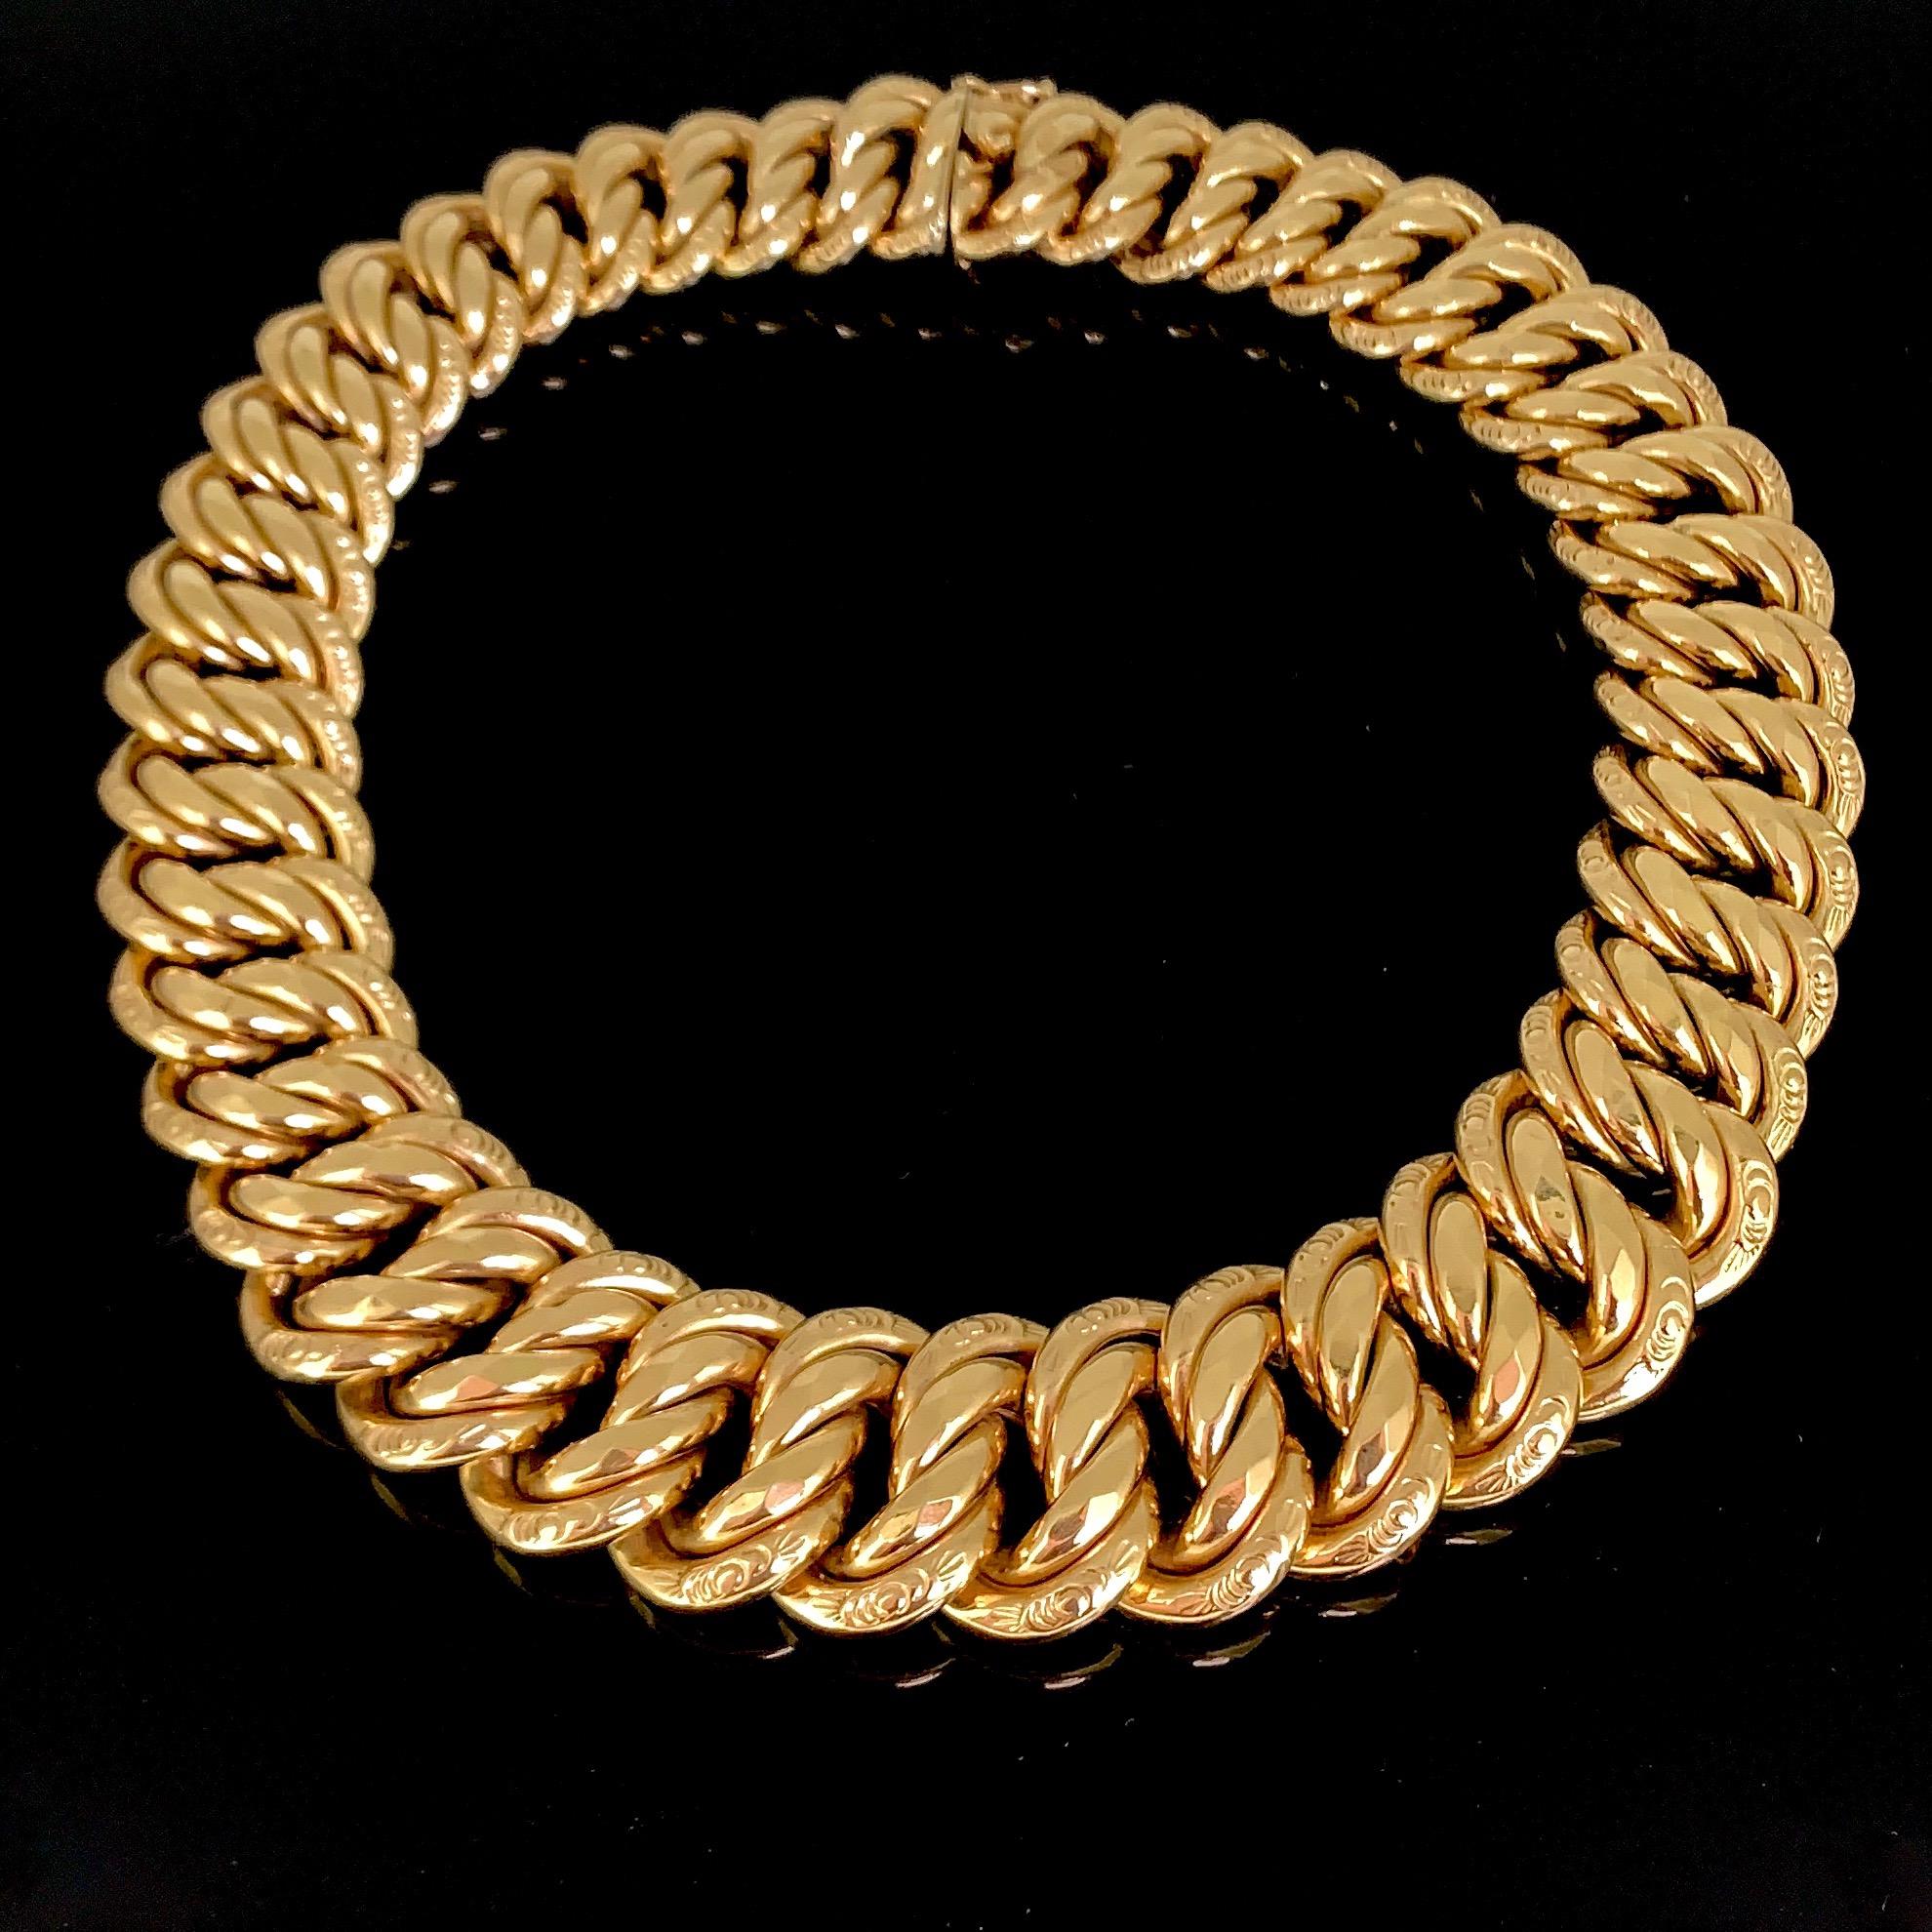 Women's or Men's Chunky Graded American Links Gold Necklace Choker